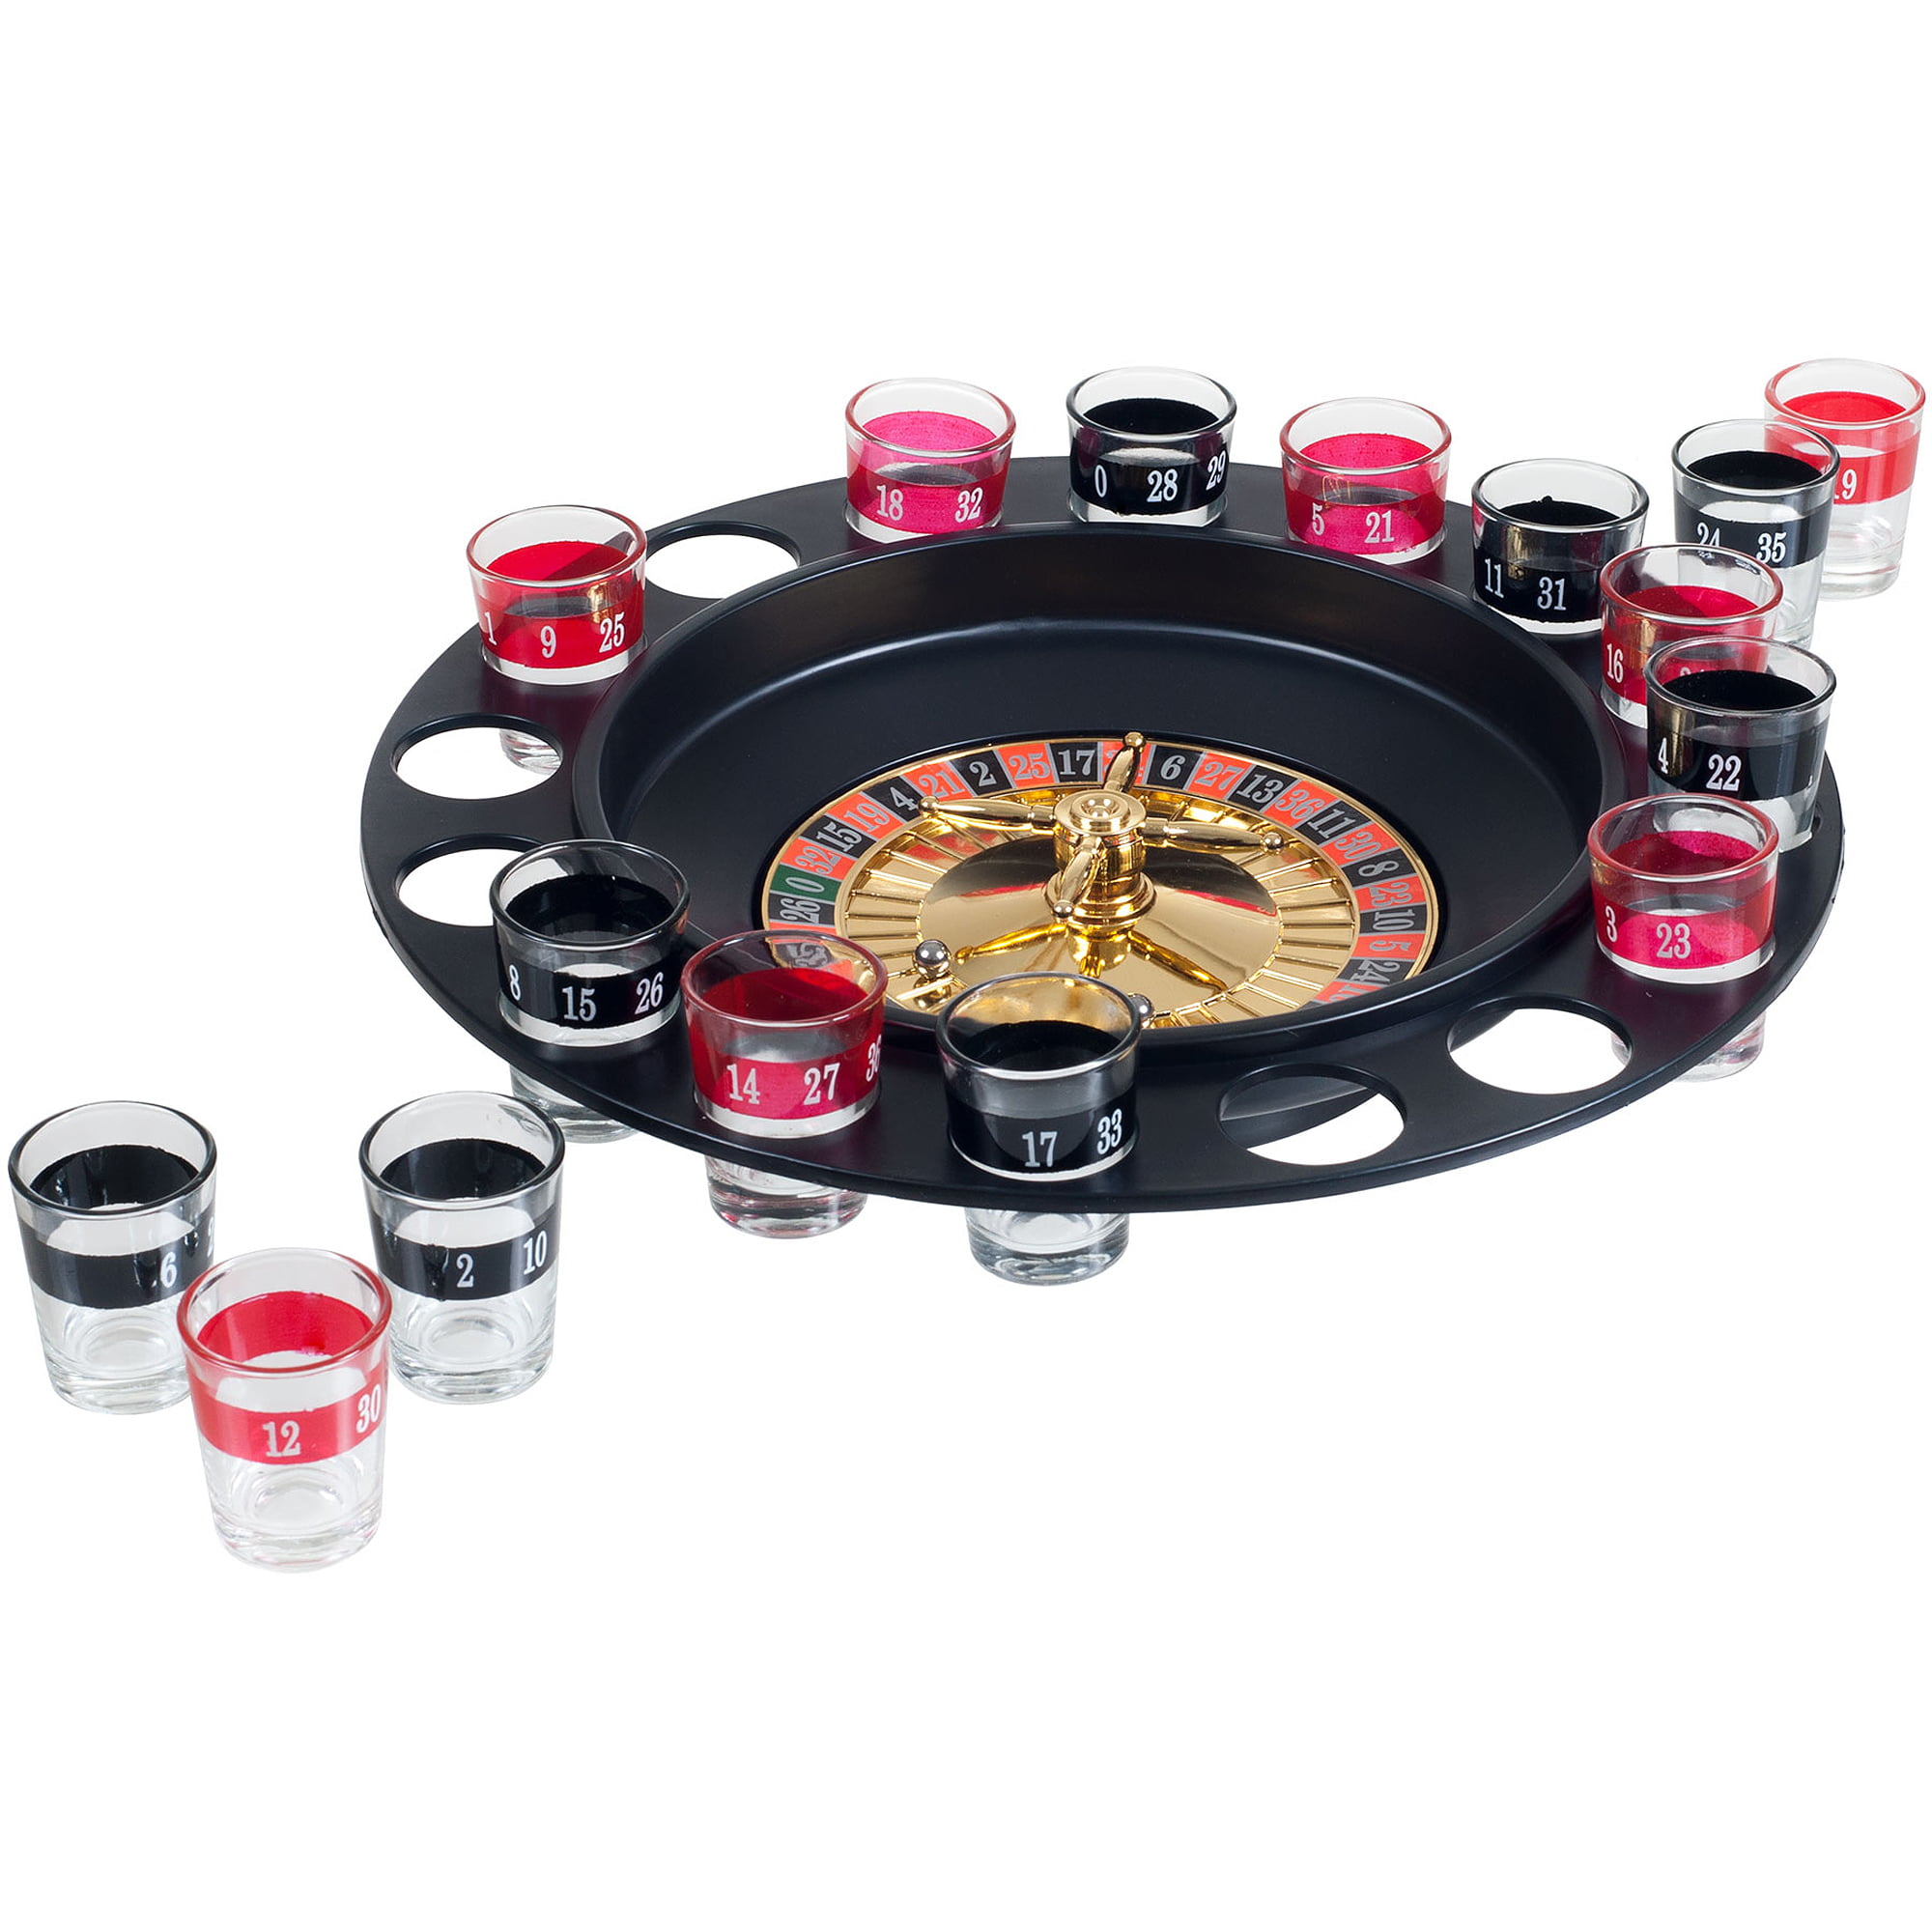 10" Drinking Roulette Wheel Game Set Casino Fathers Day Dorms Coworker Gift 